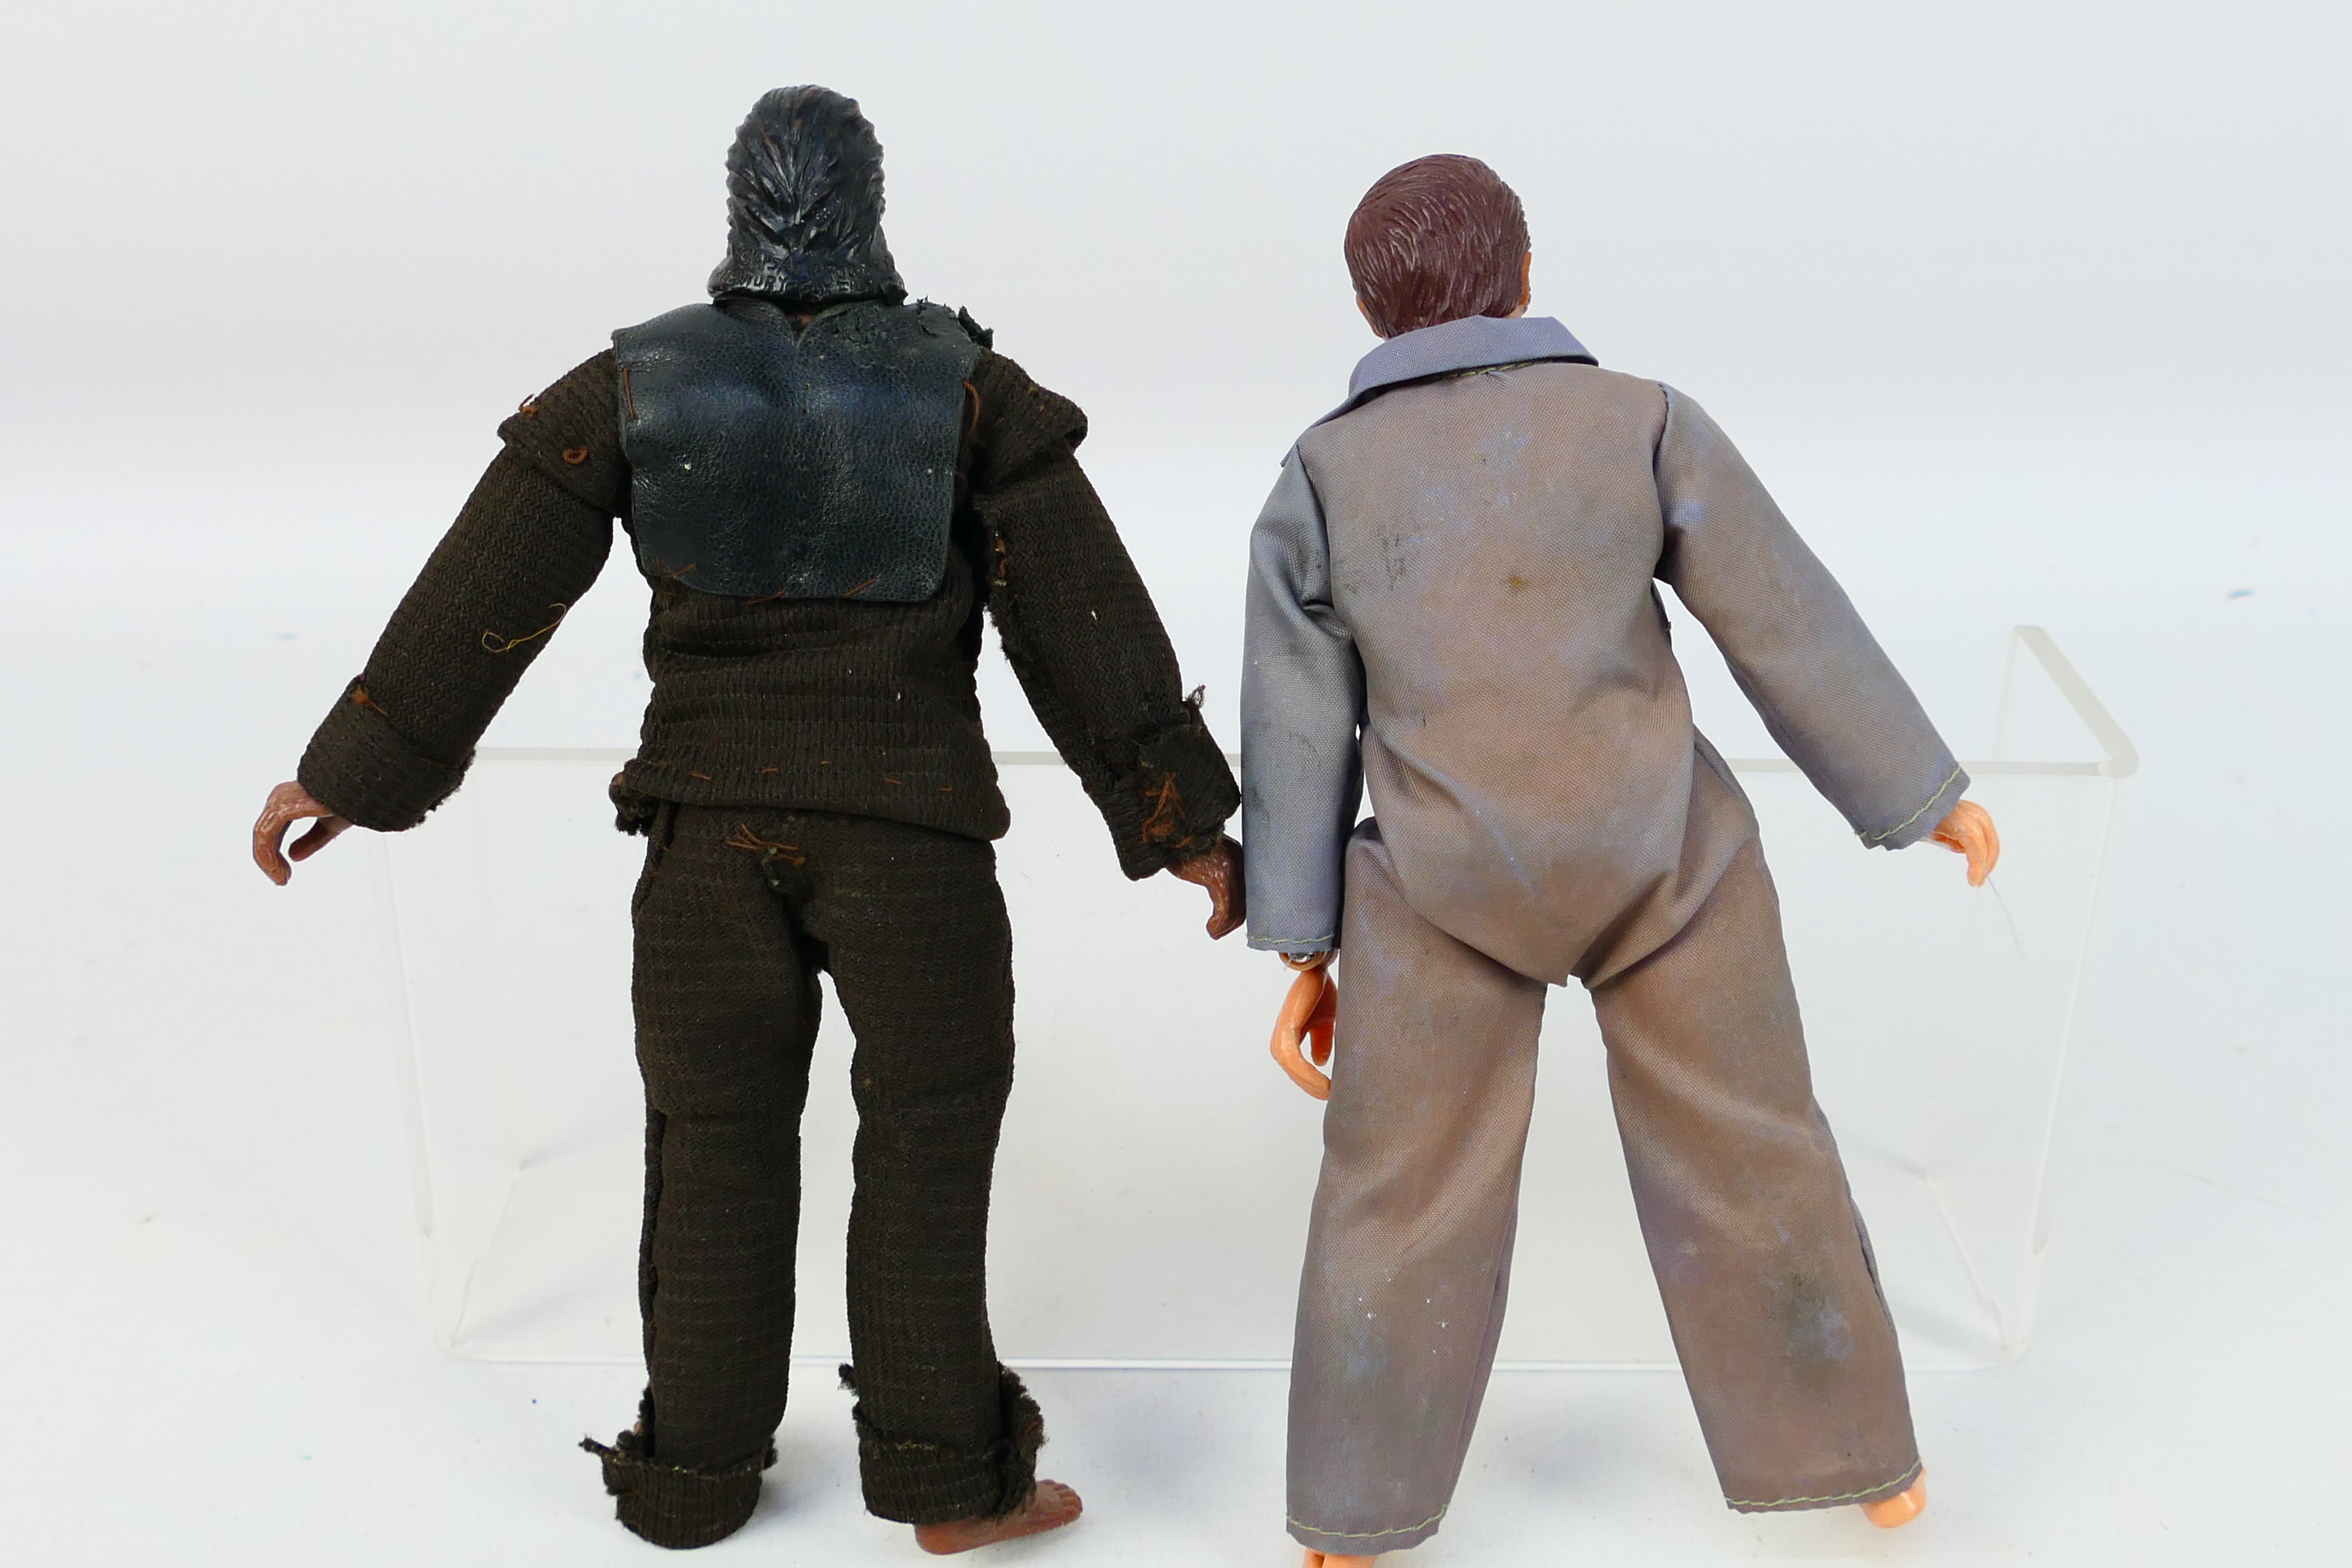 Mego Corp - Apjac - Planet of the Apes - A pair of 8" action figures from The Planet of The Apes - Image 6 of 6